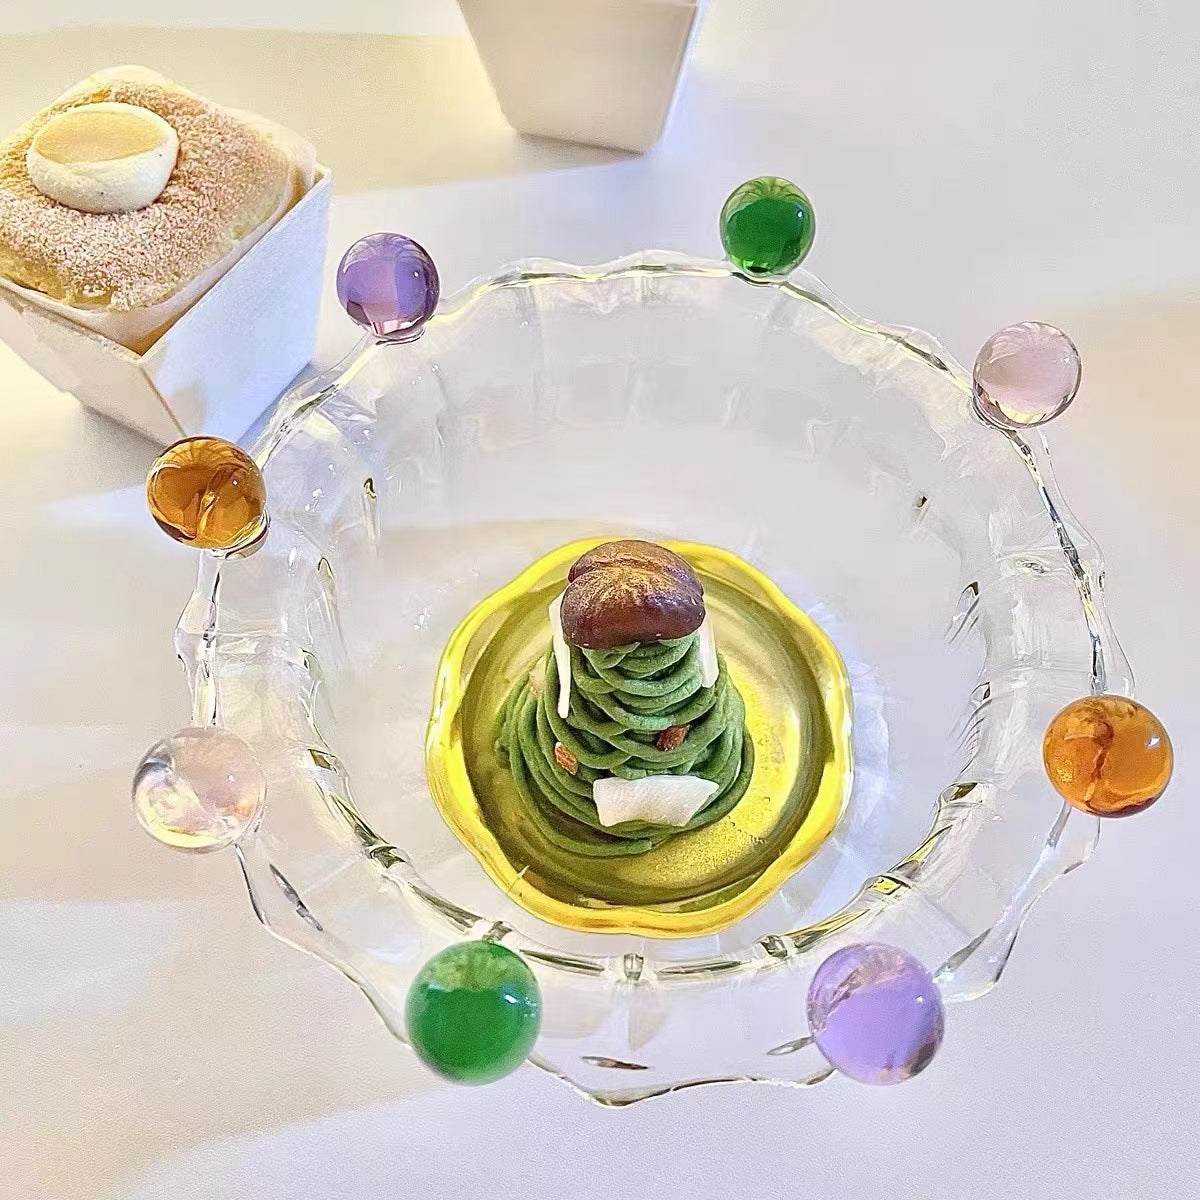 Wavy Flower Shaped Glass Dessert Bowl with colorful beads